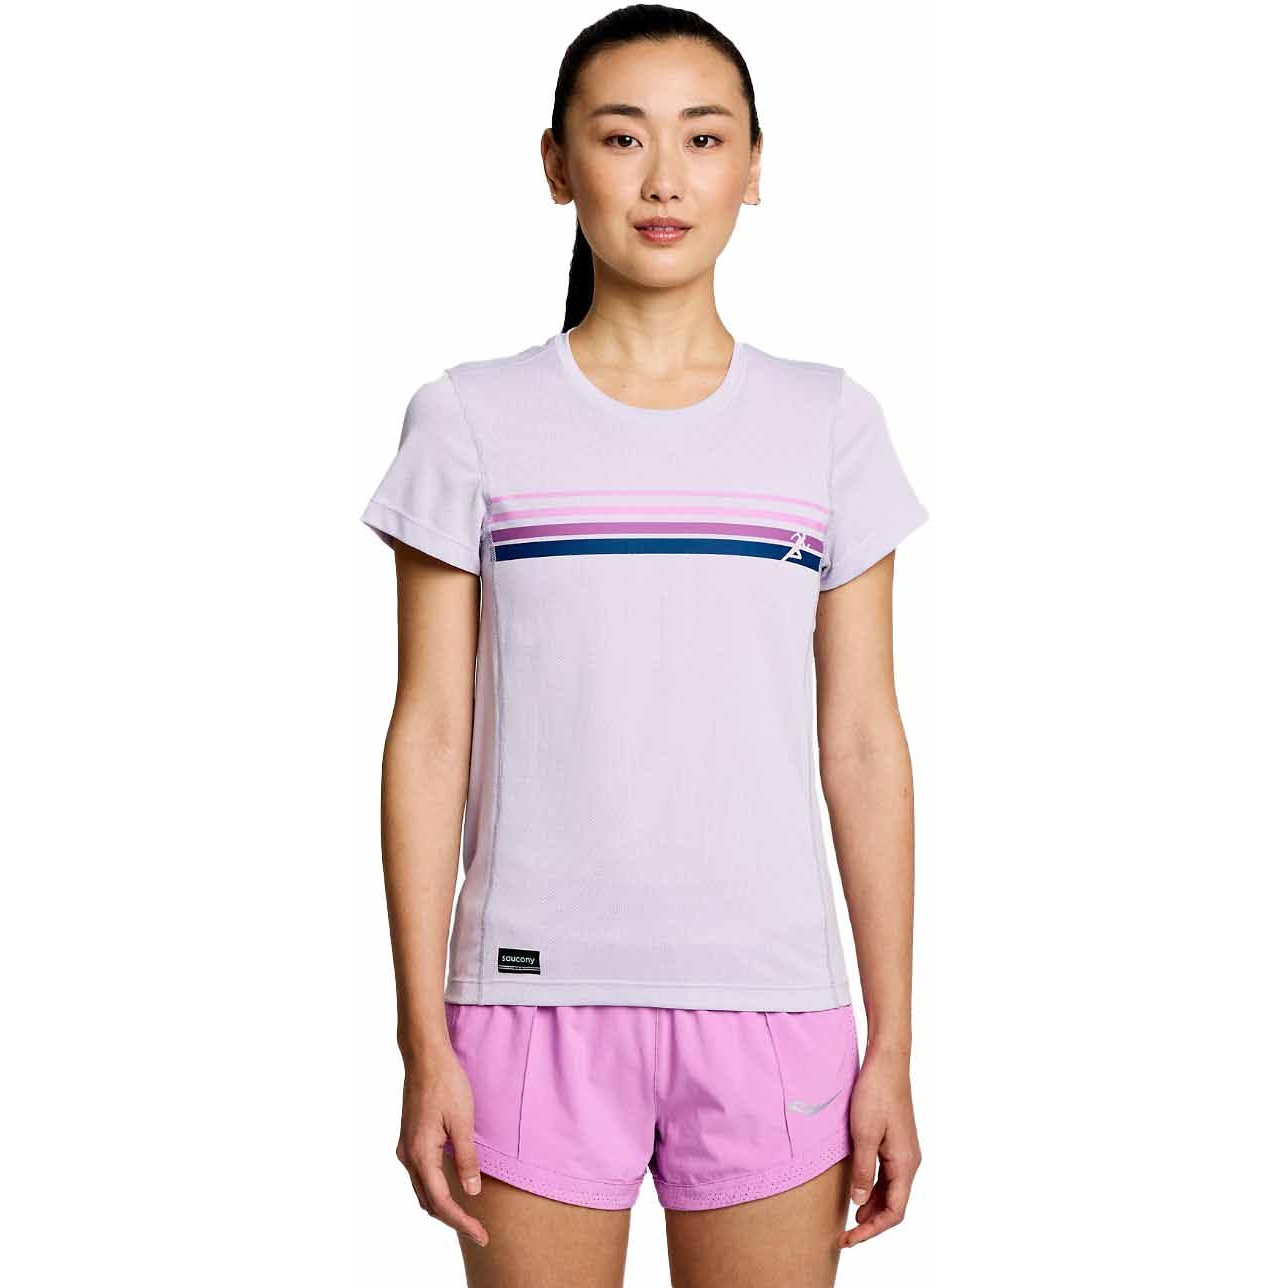 Picture of Saucony Stopwatch Graphic Short Sleeve Shirt Women - mauve graphic